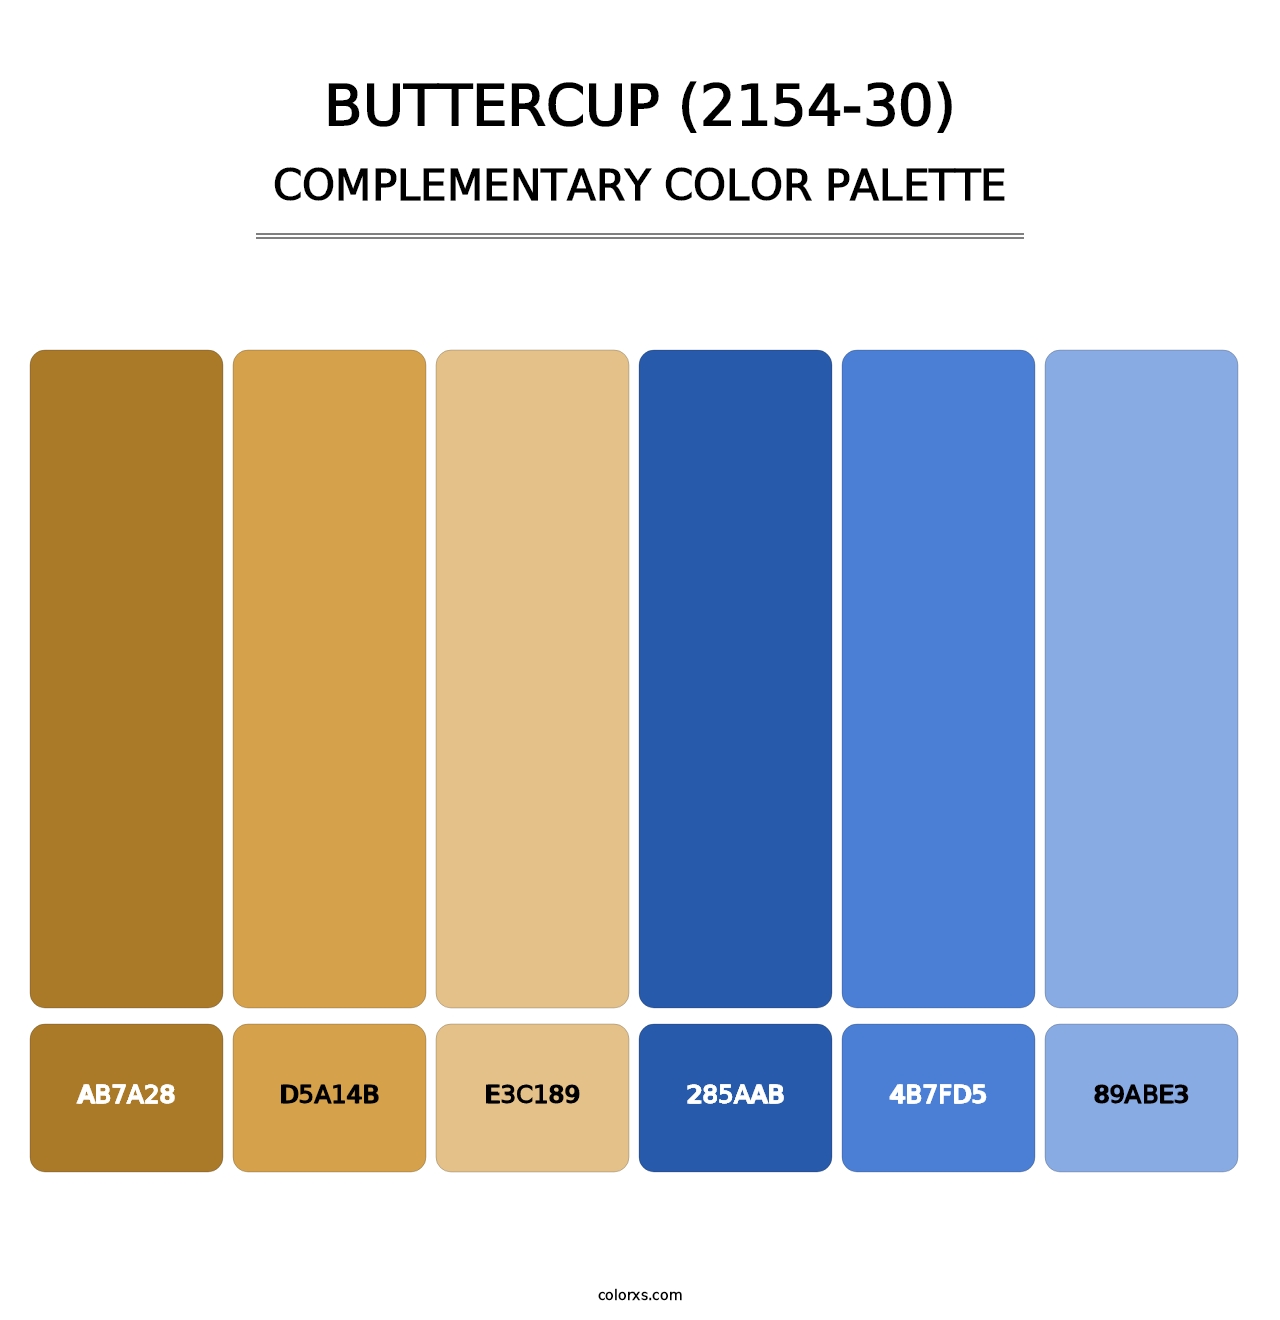 Buttercup (2154-30) - Complementary Color Palette